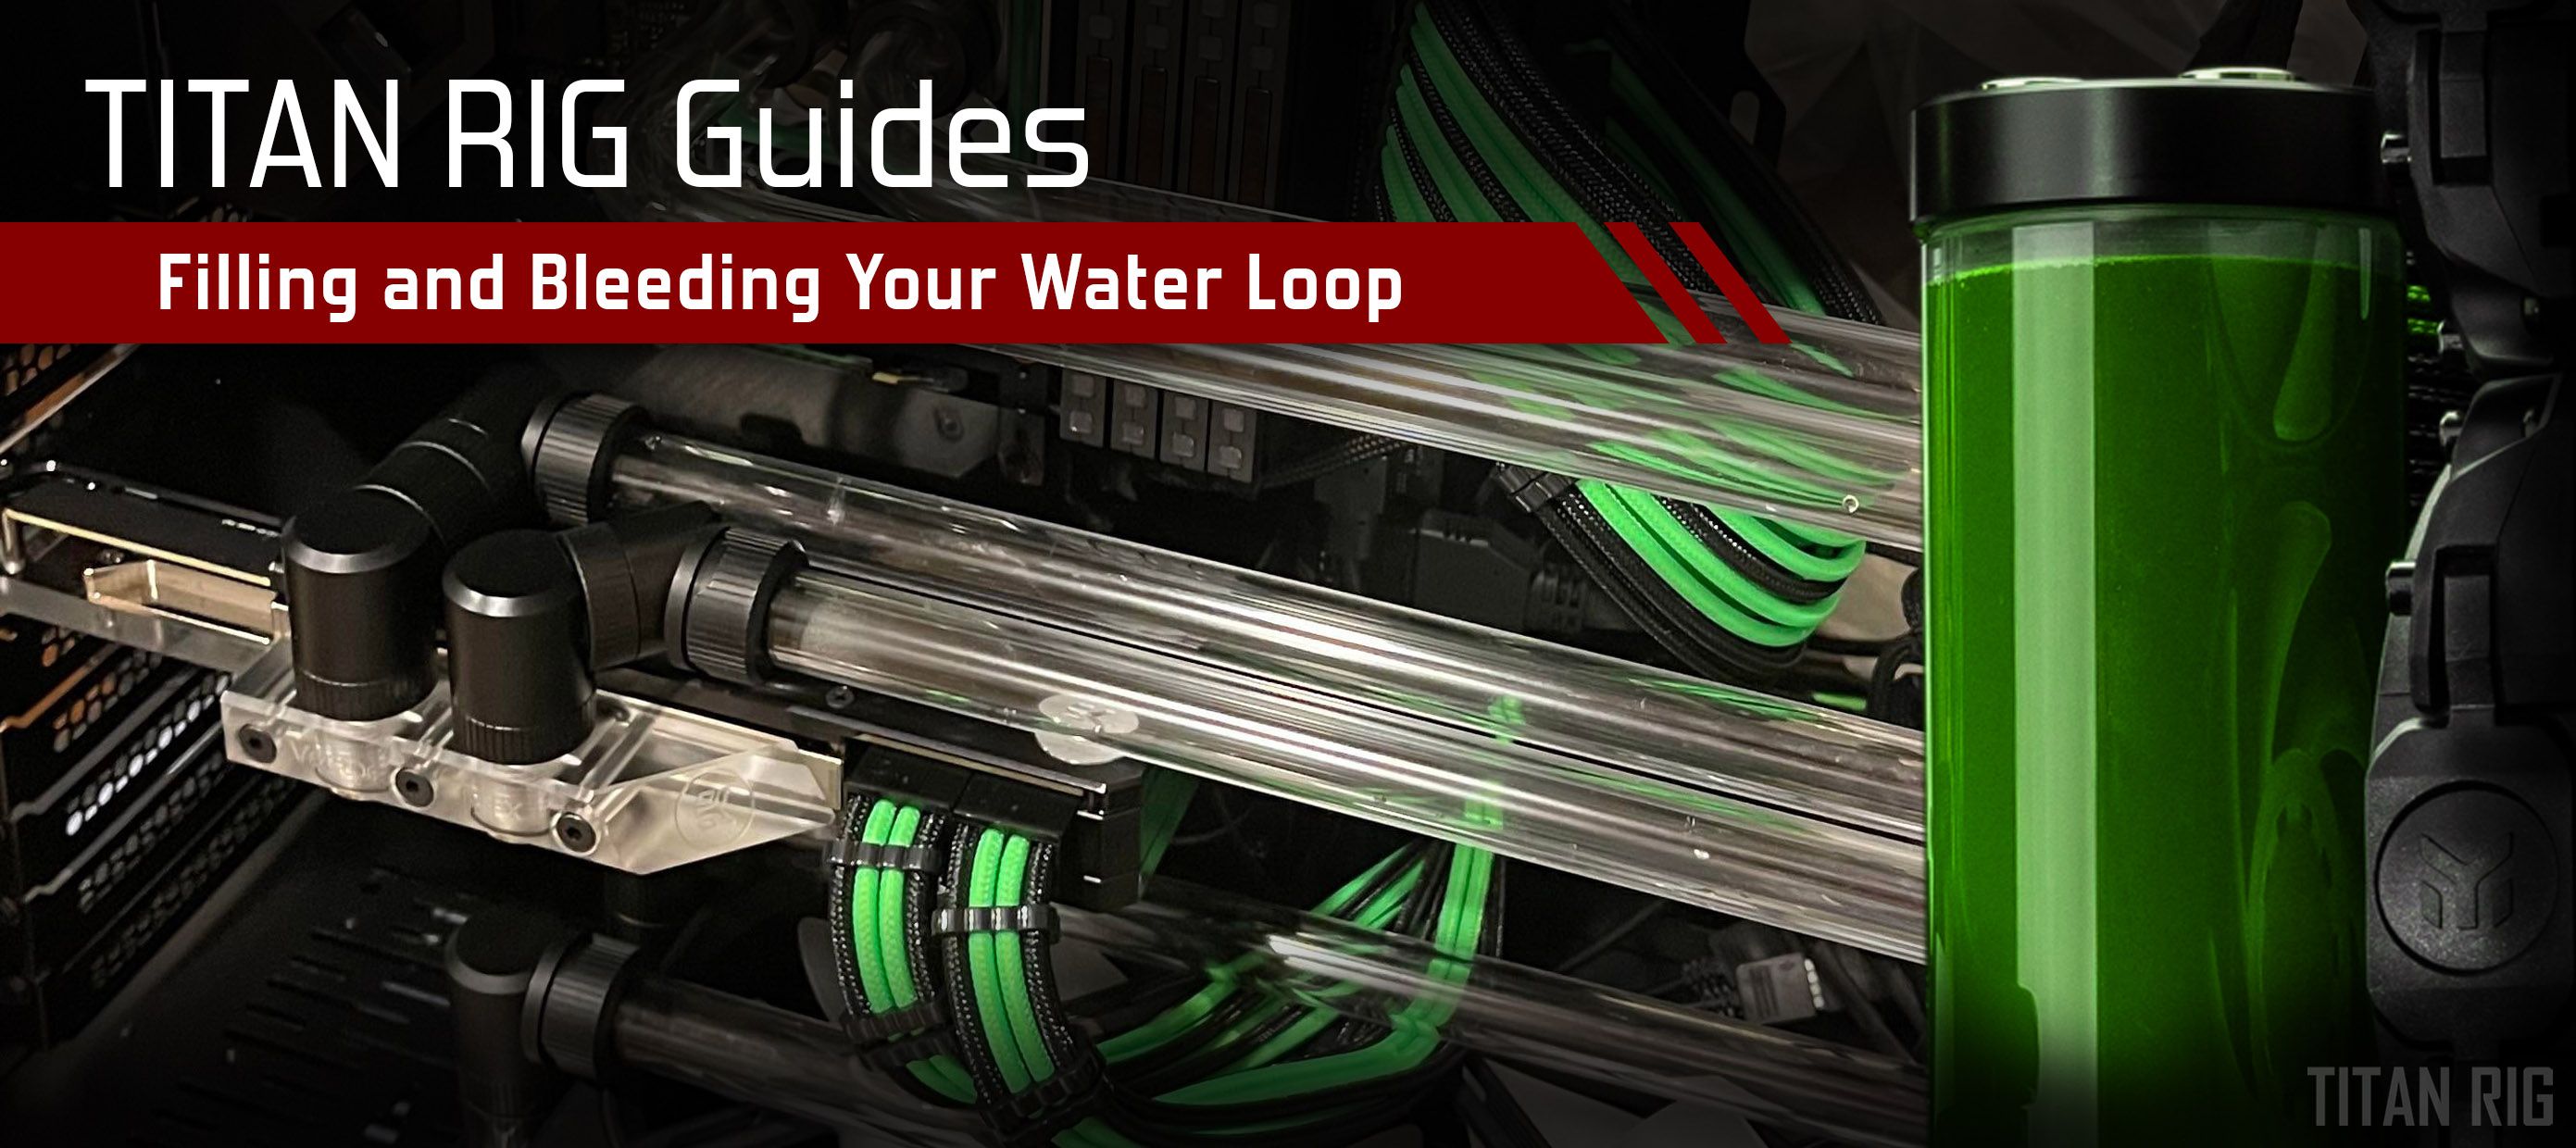 How To Fill And Bleed Your Water Loop